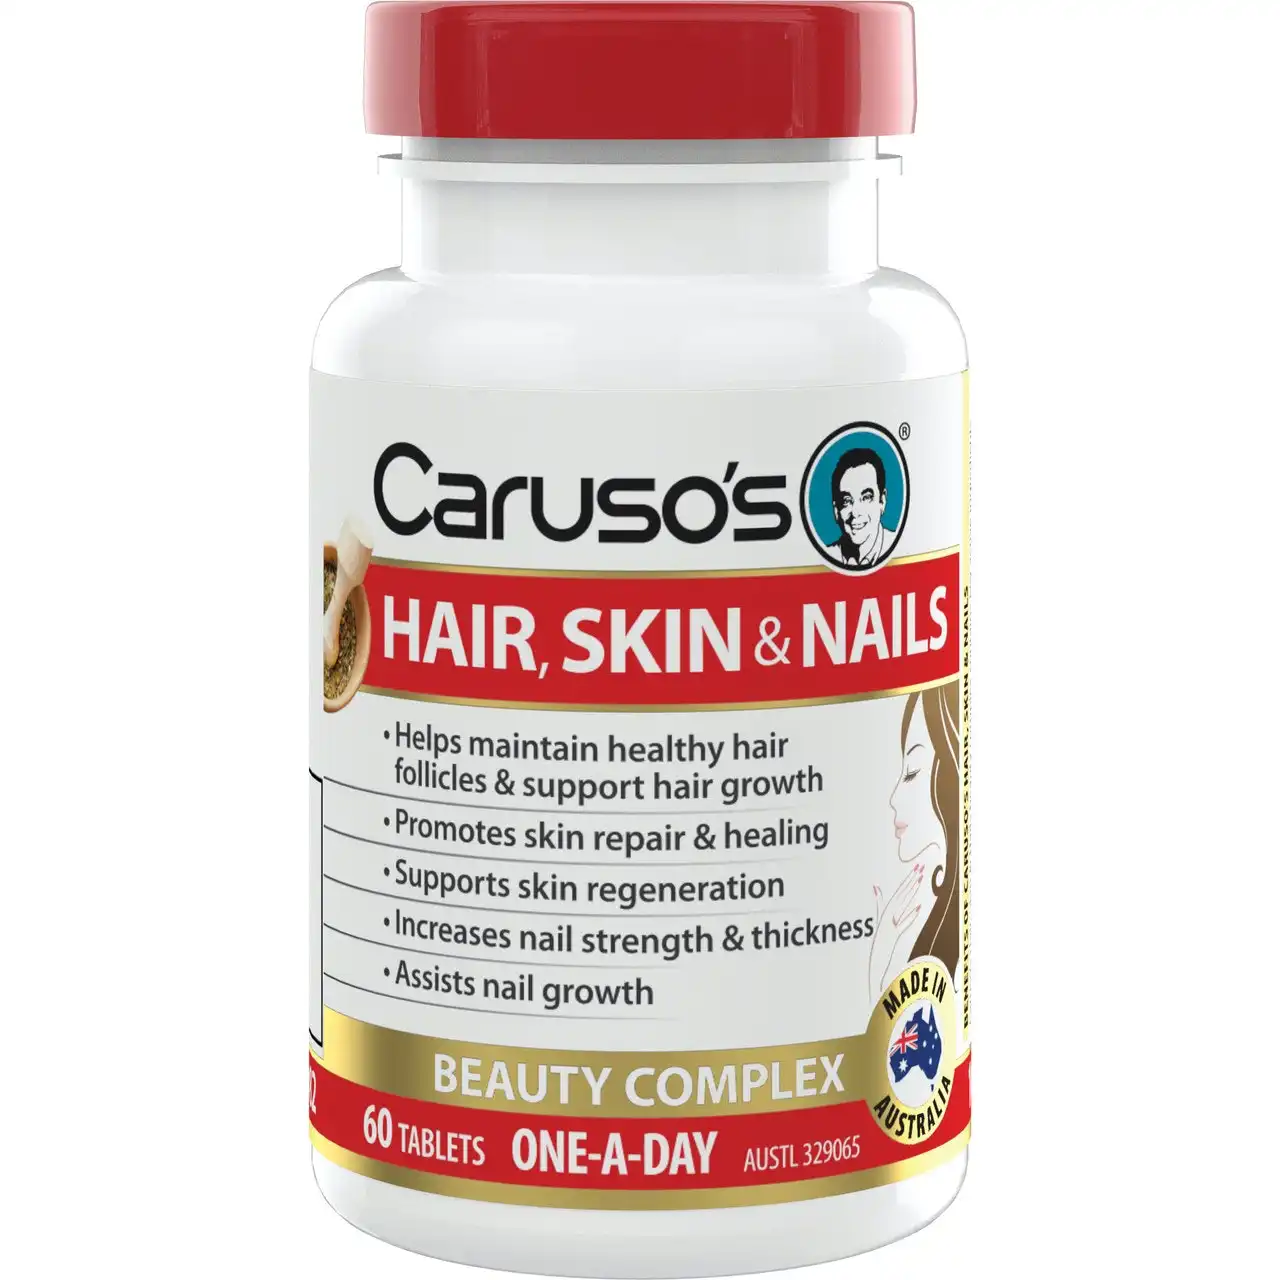 Caruso's Hair, Skin, & Nails 60 Tablets